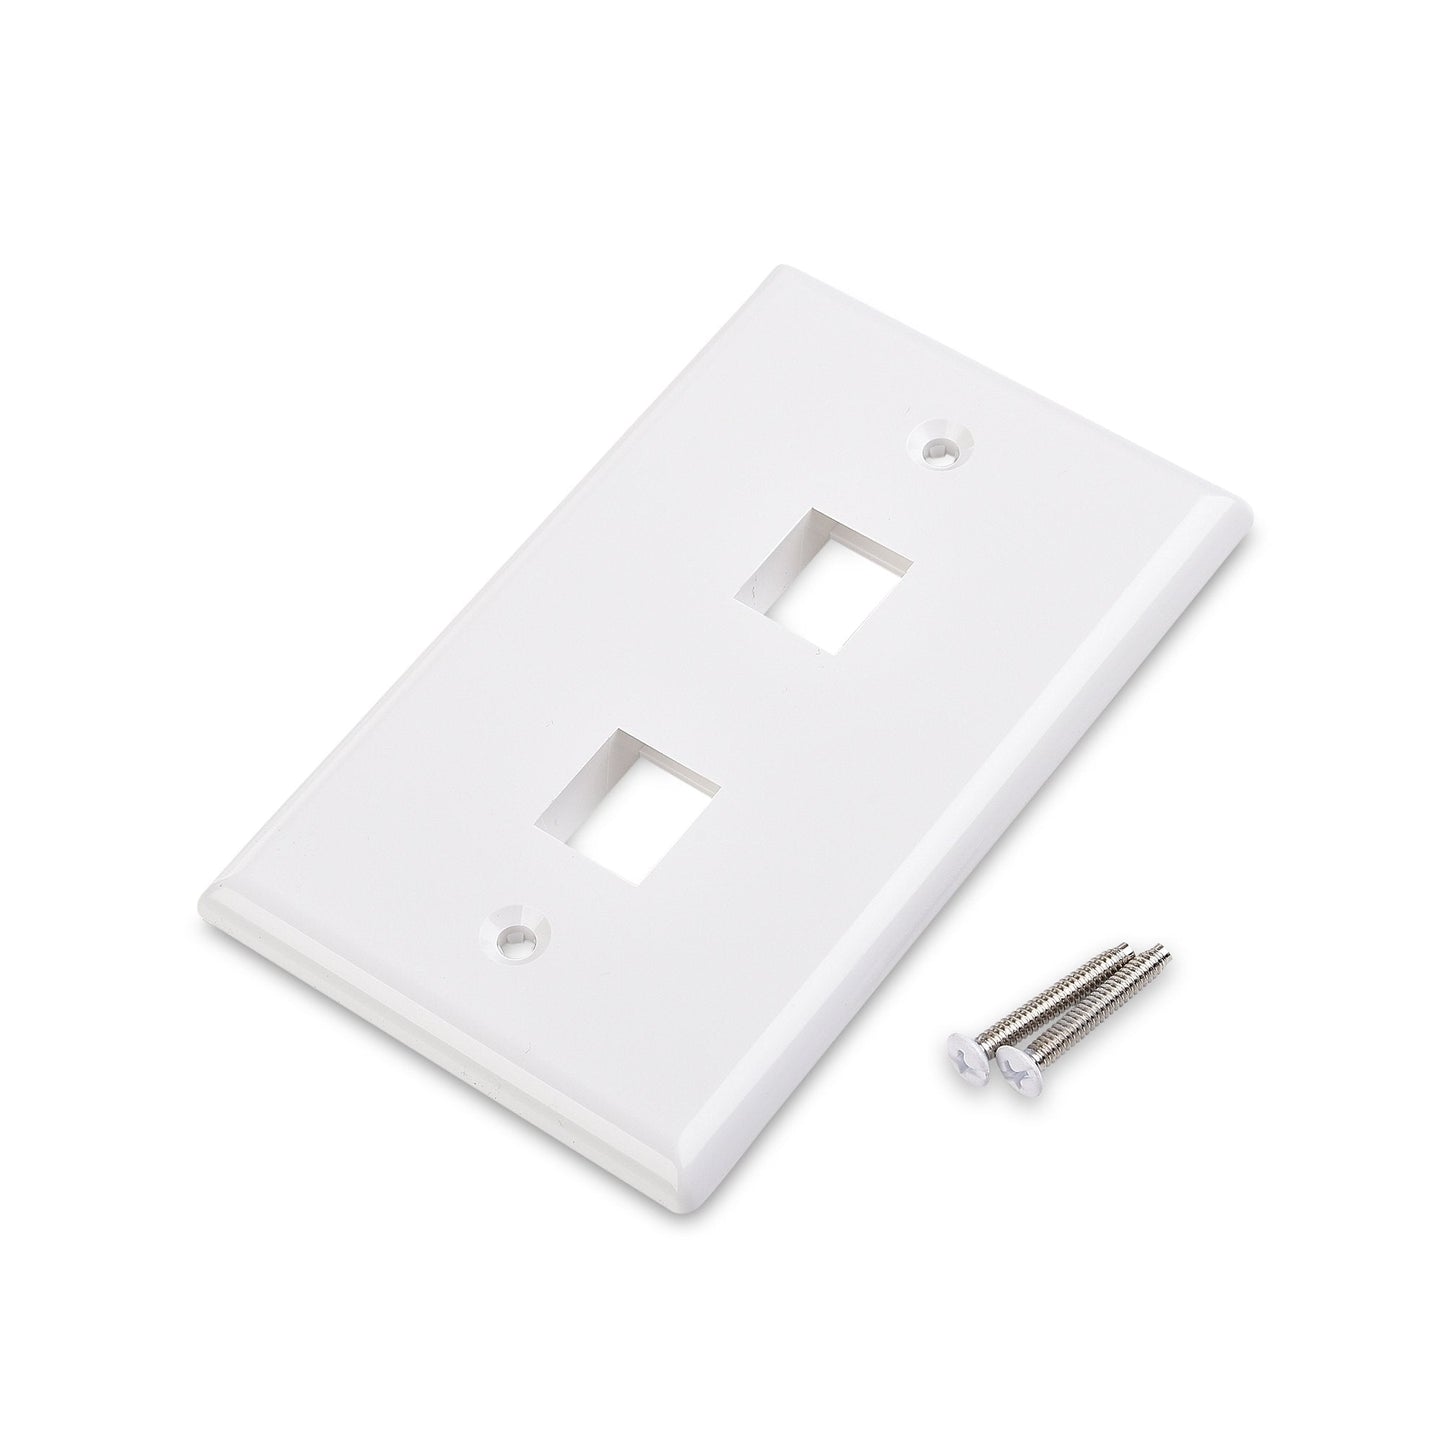 2-Port RJ45 Keystone Jack Low Profile Wall Plate in  Totality  White - 1pc